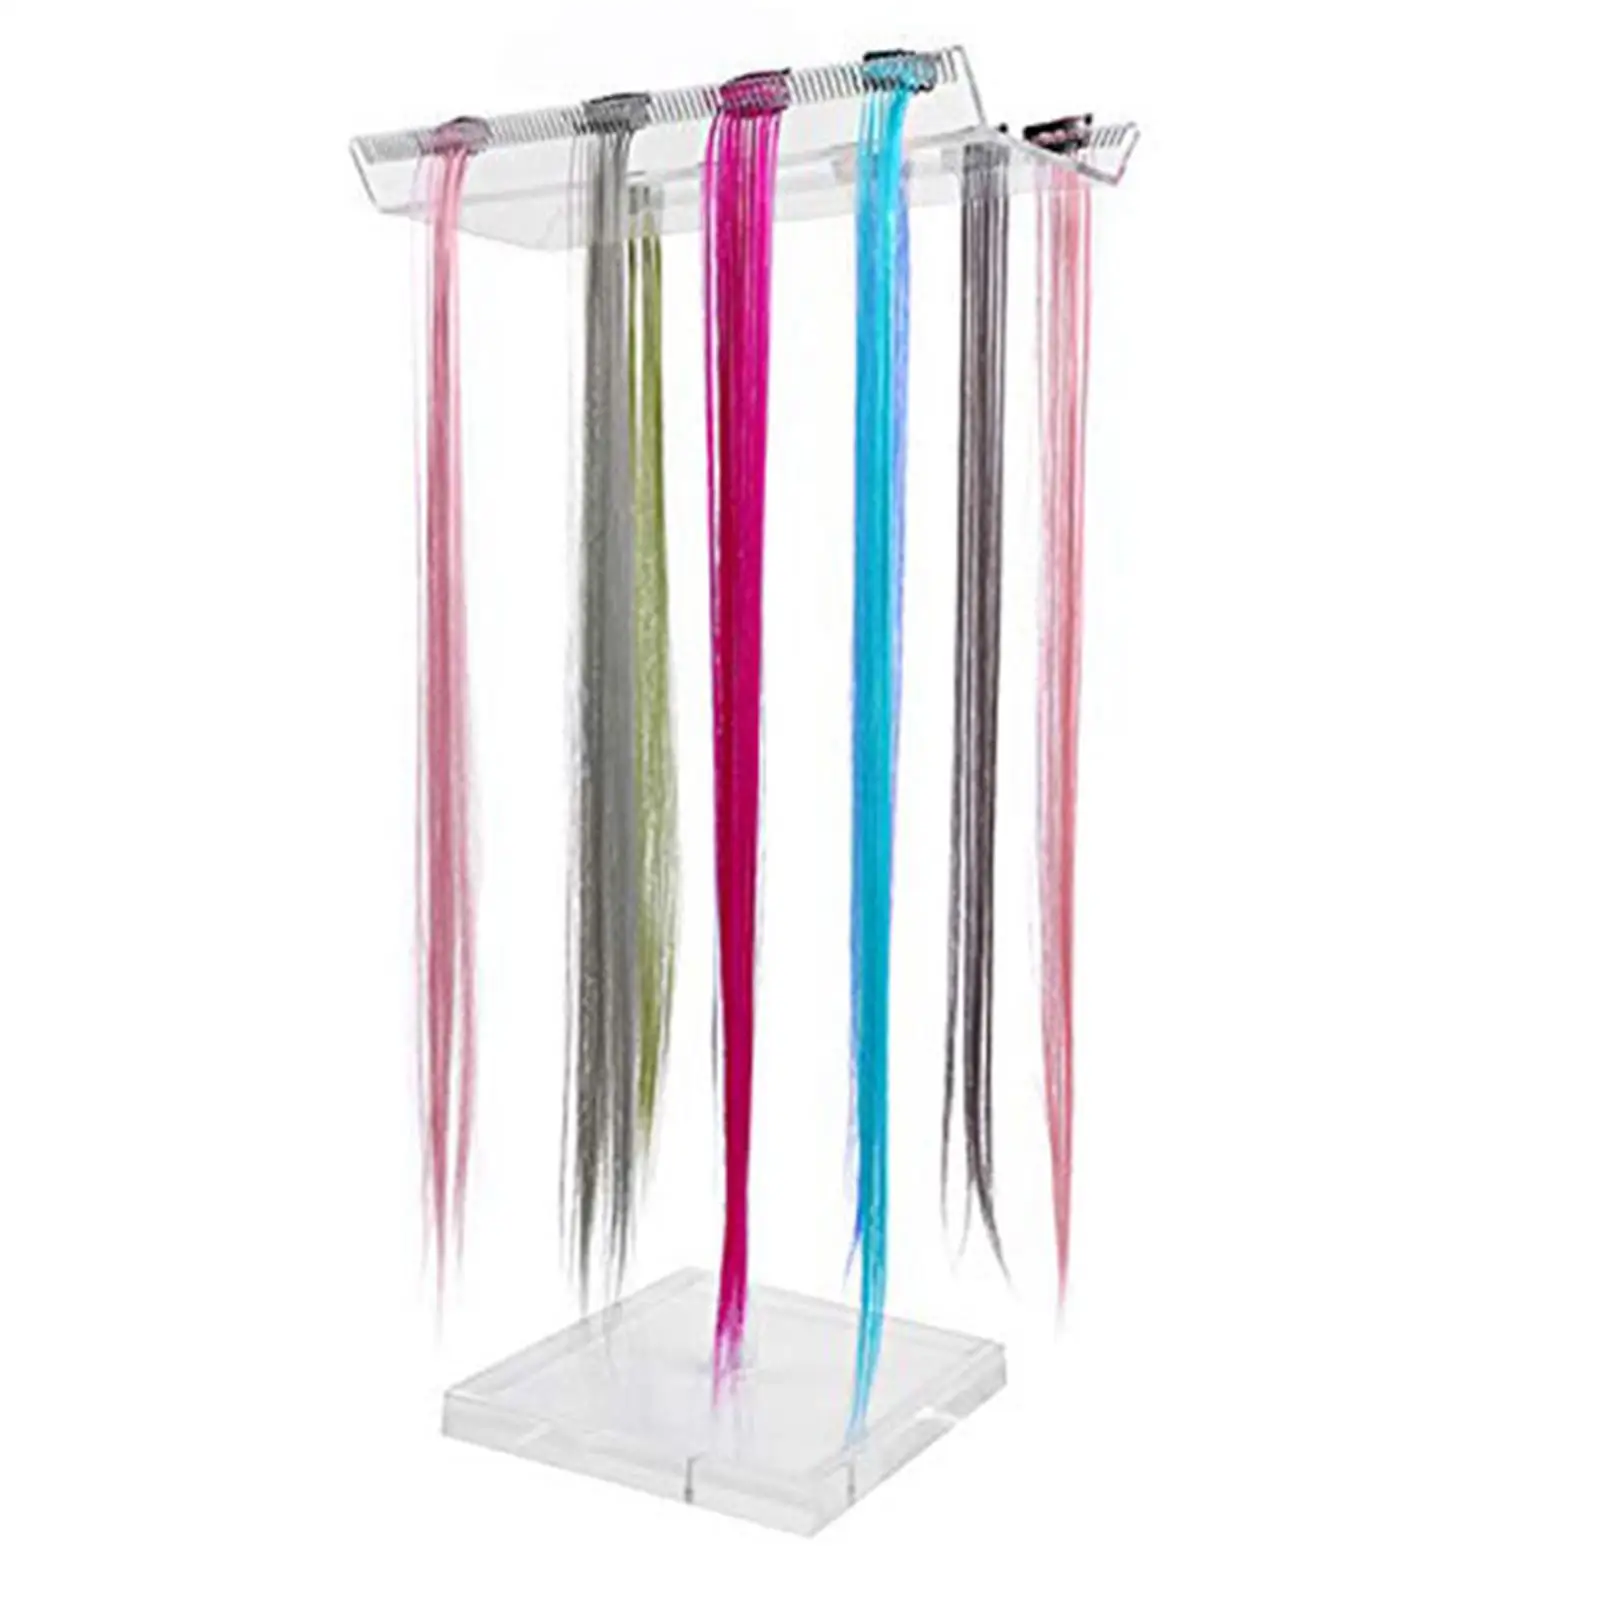 Wigs Display Rack Stand Hair Extension Holder Wigs Stands Multi Function Wig Display Holder for Women